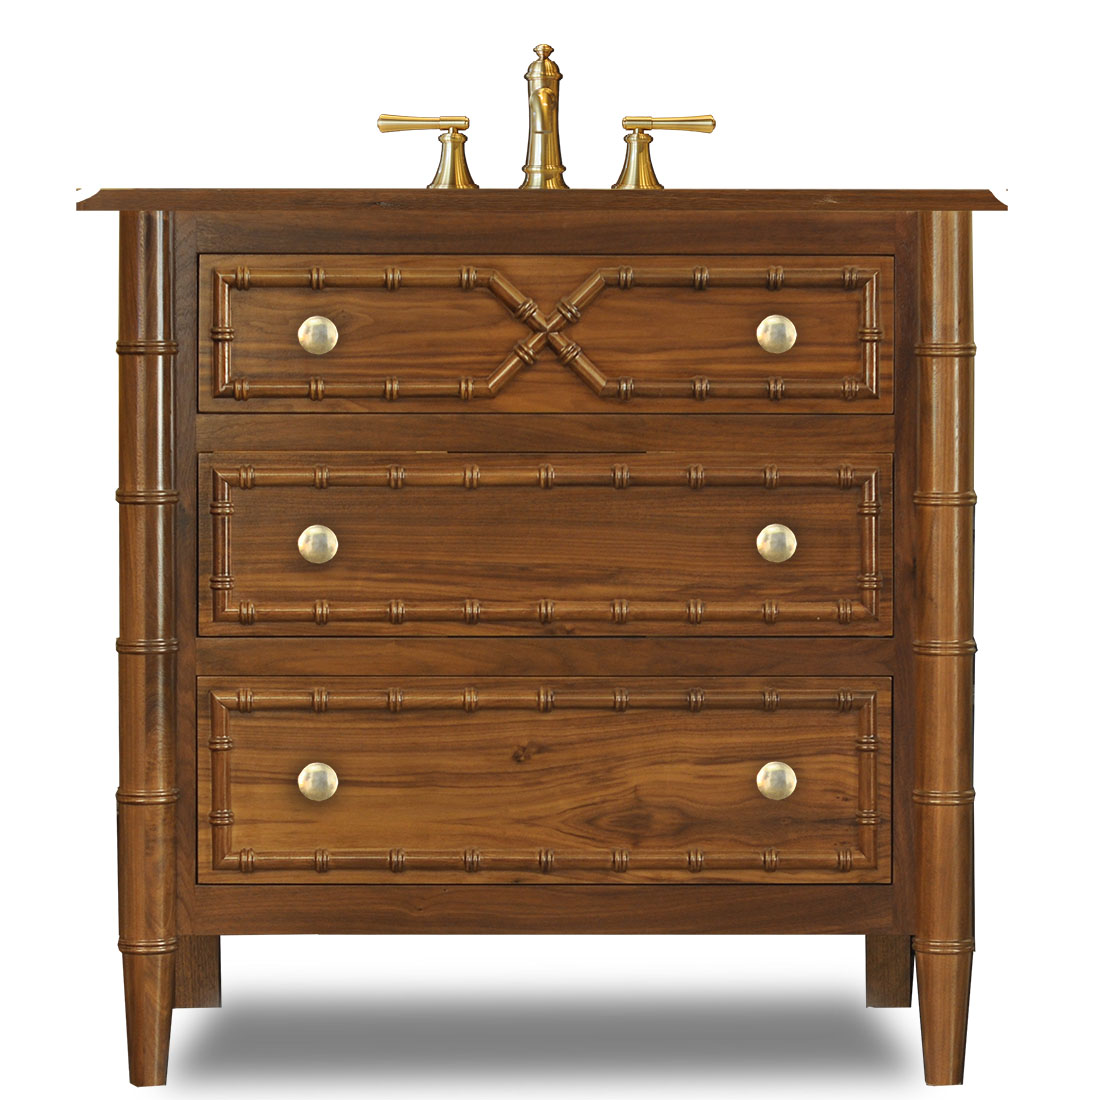 American Bristol with Drawers – 36″ W